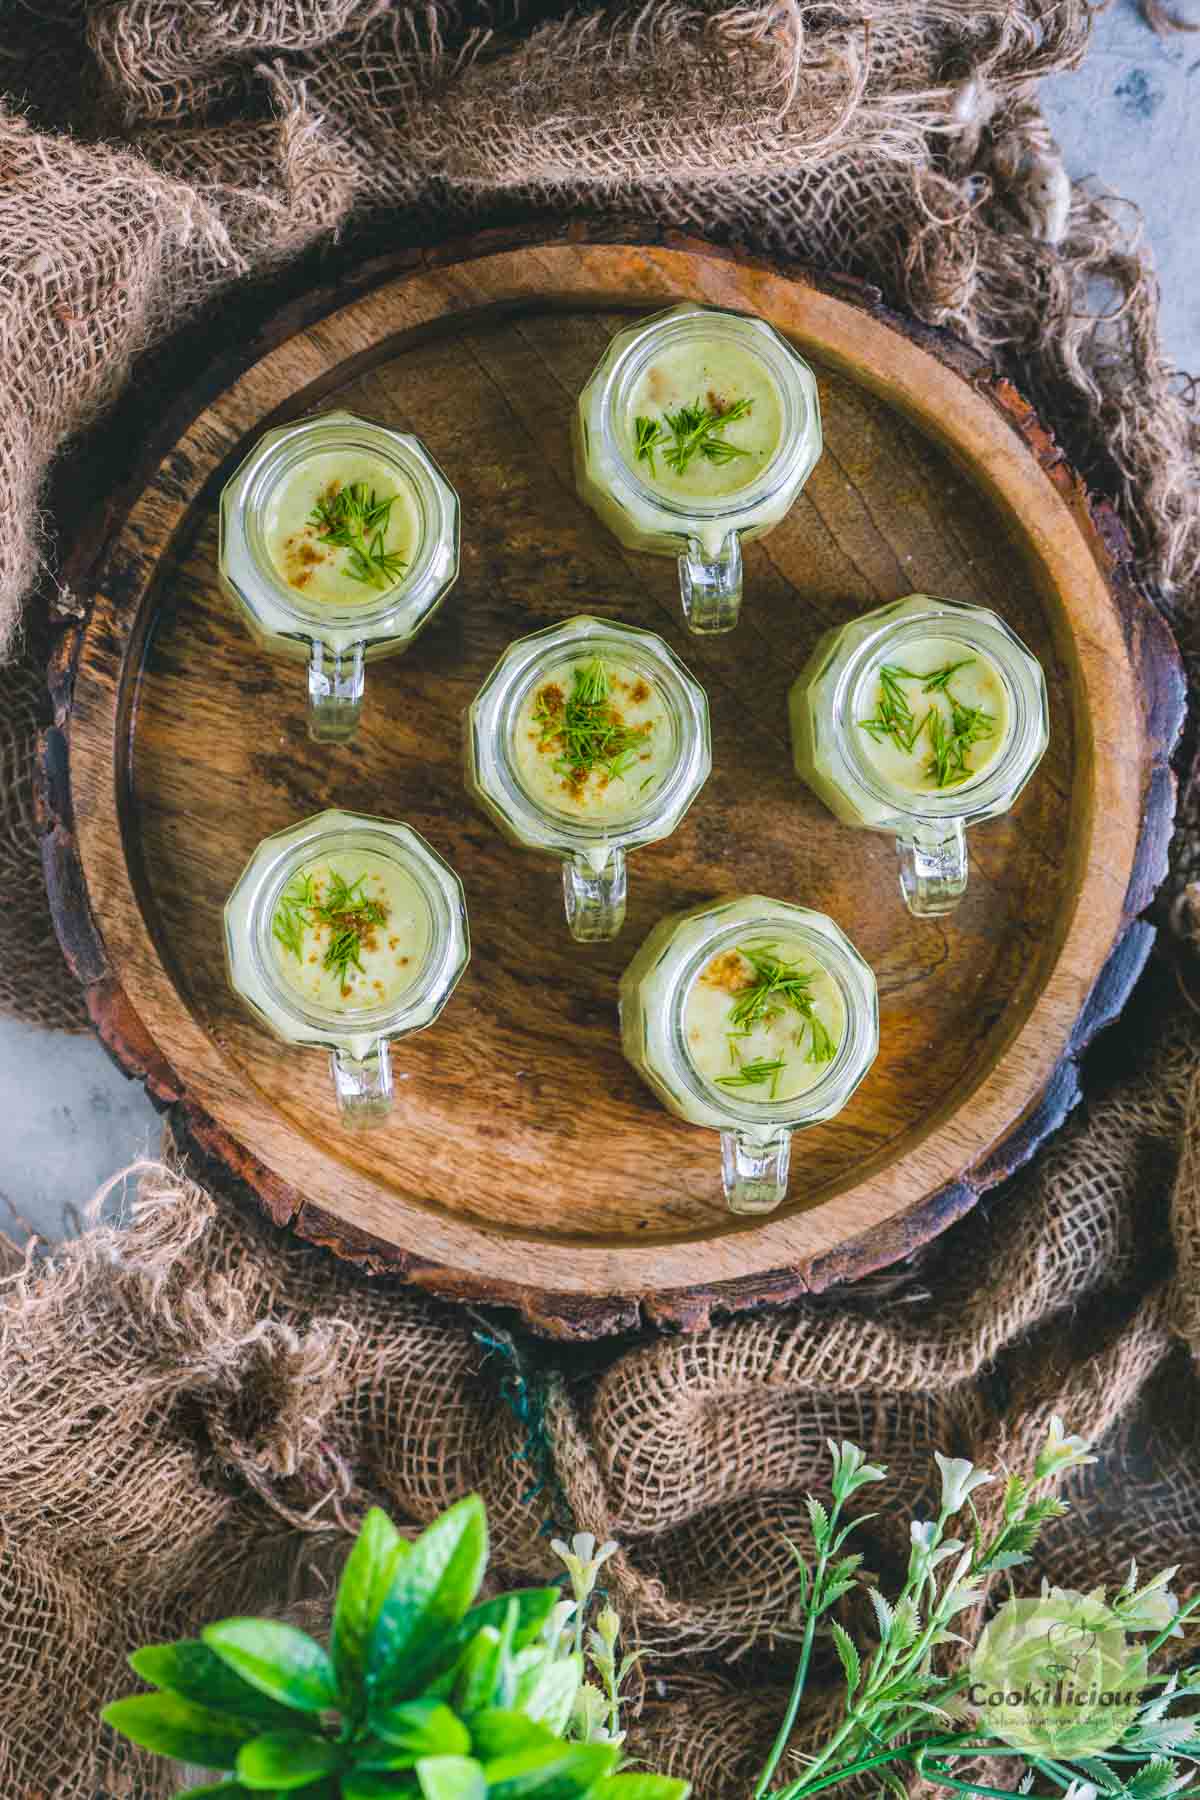 a wooden tray filled with cucumber soup shot glasses